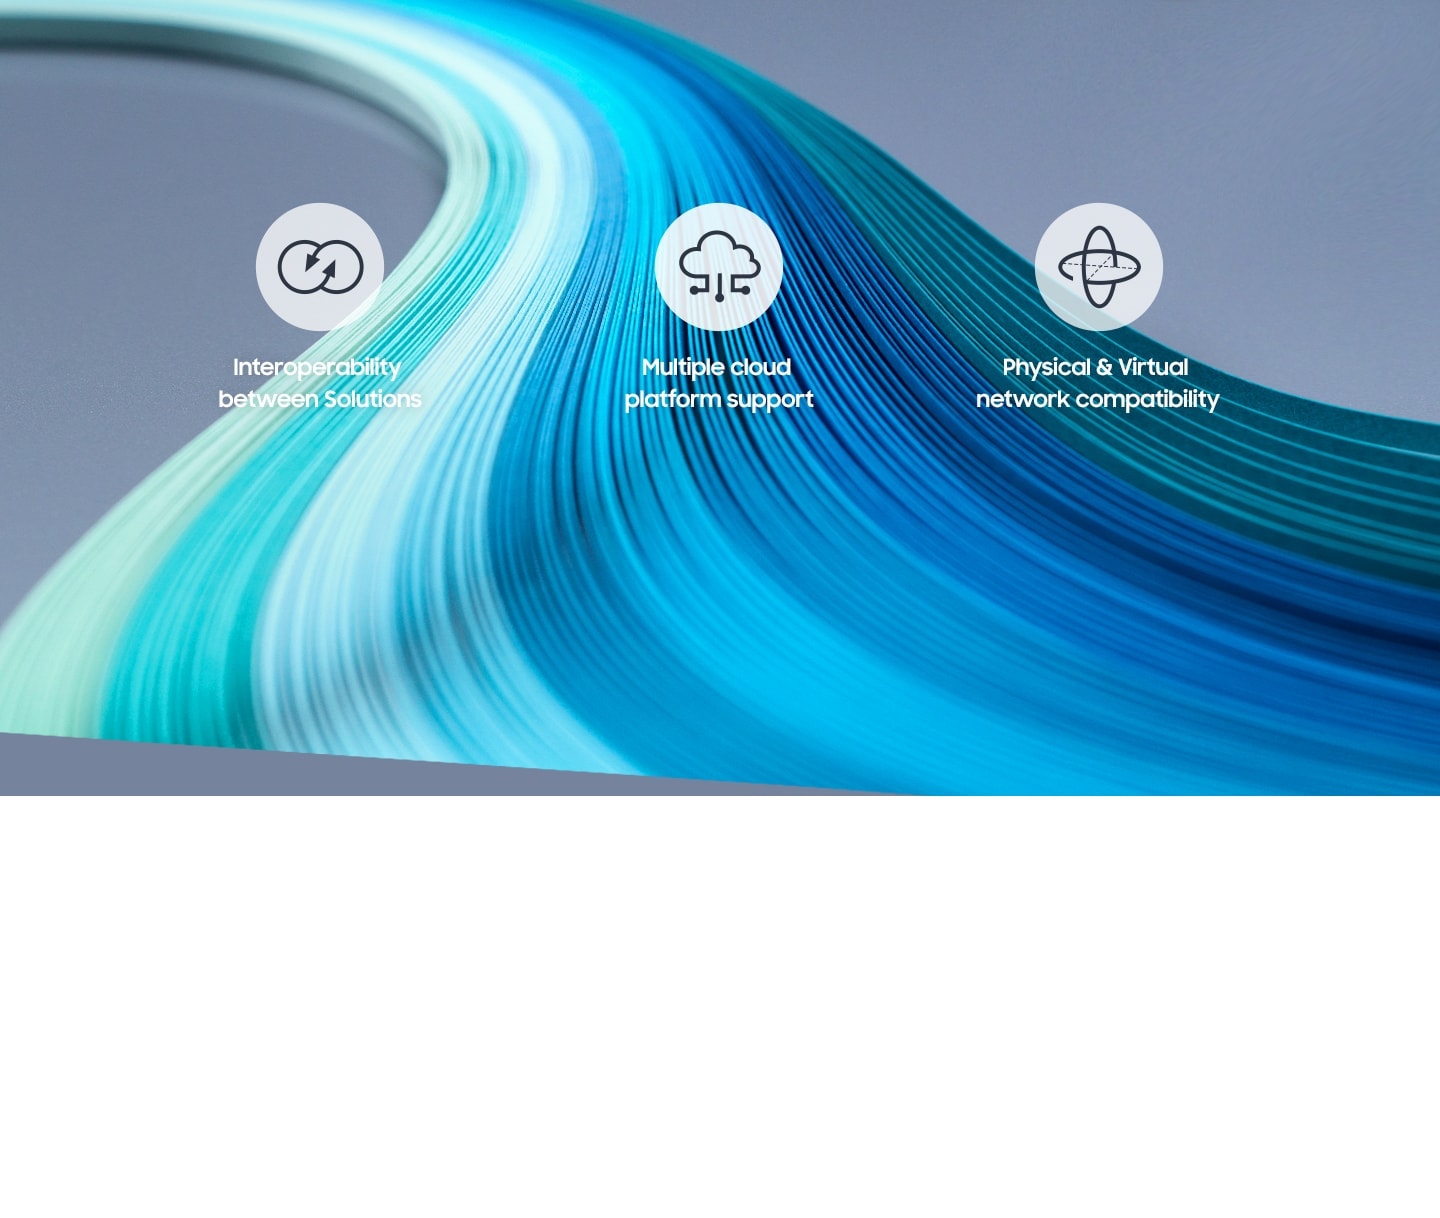 An illustrative image of blue series of curved lines with icons describing Cloud Orchestration.